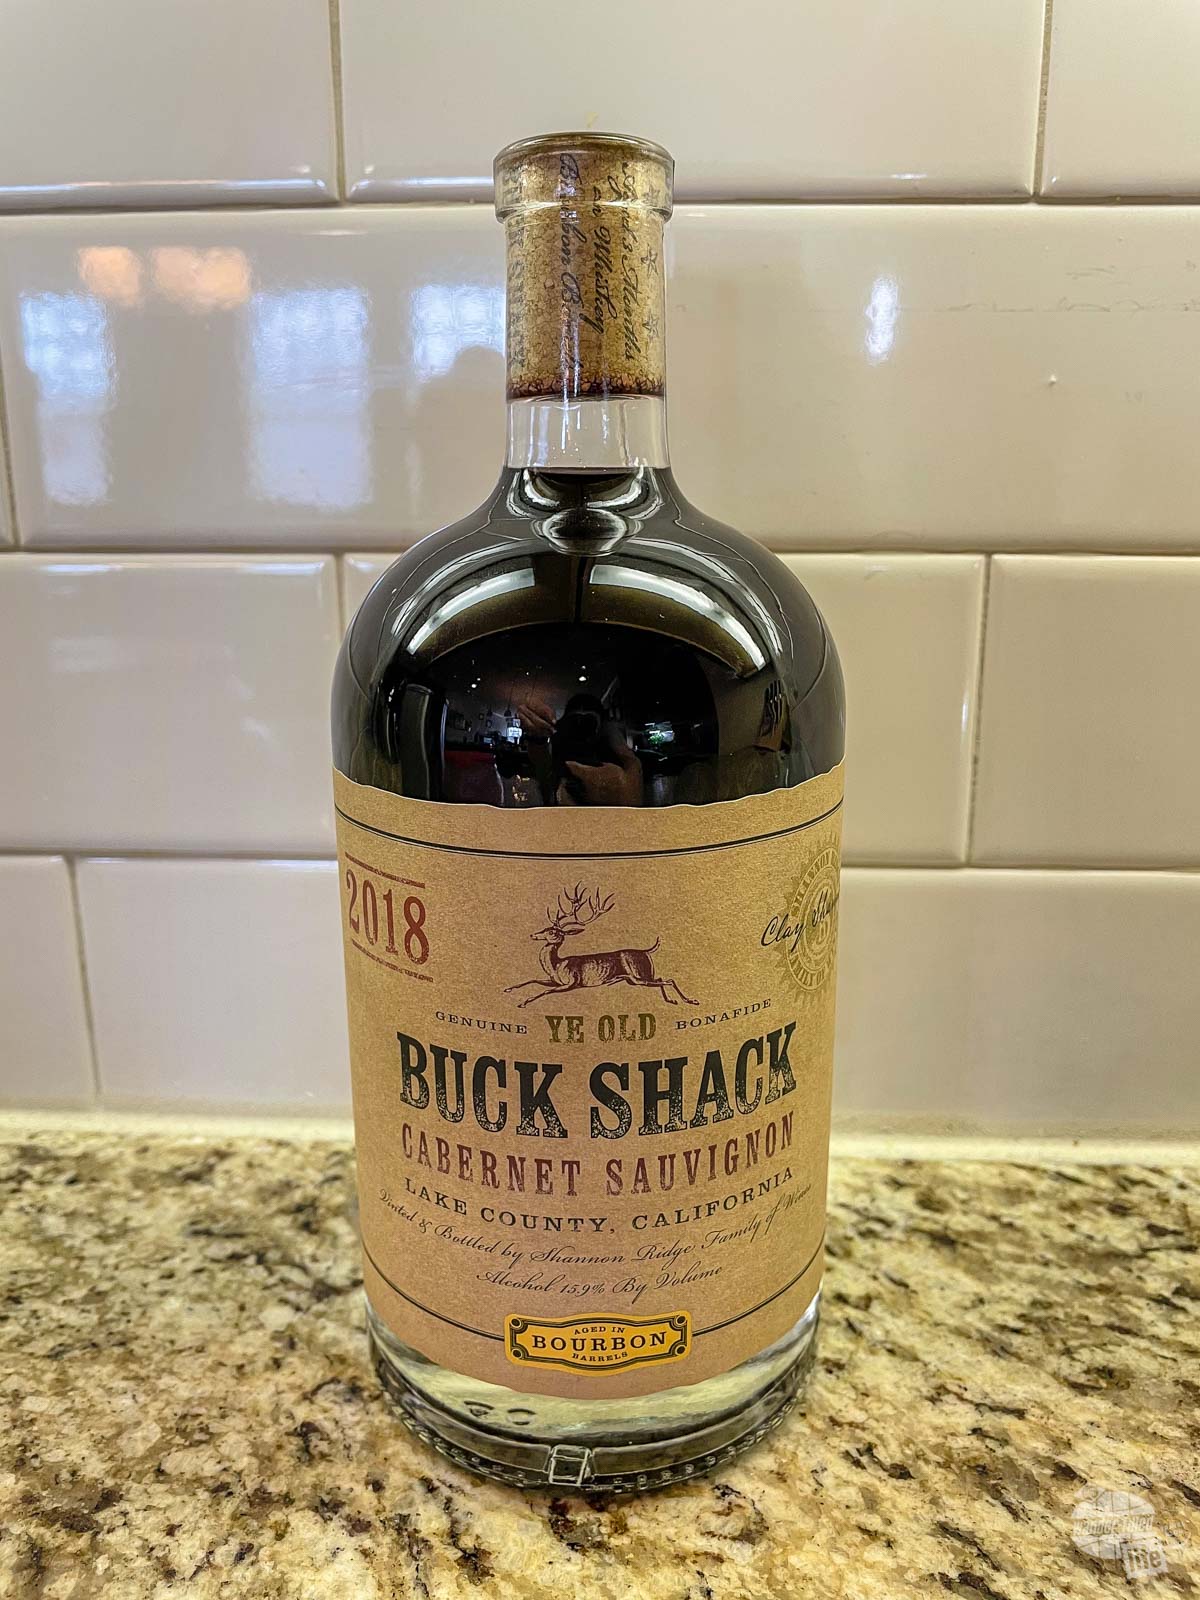 A bottle of Buck Shack Cabernet Sauvignon from Buc-ee's.